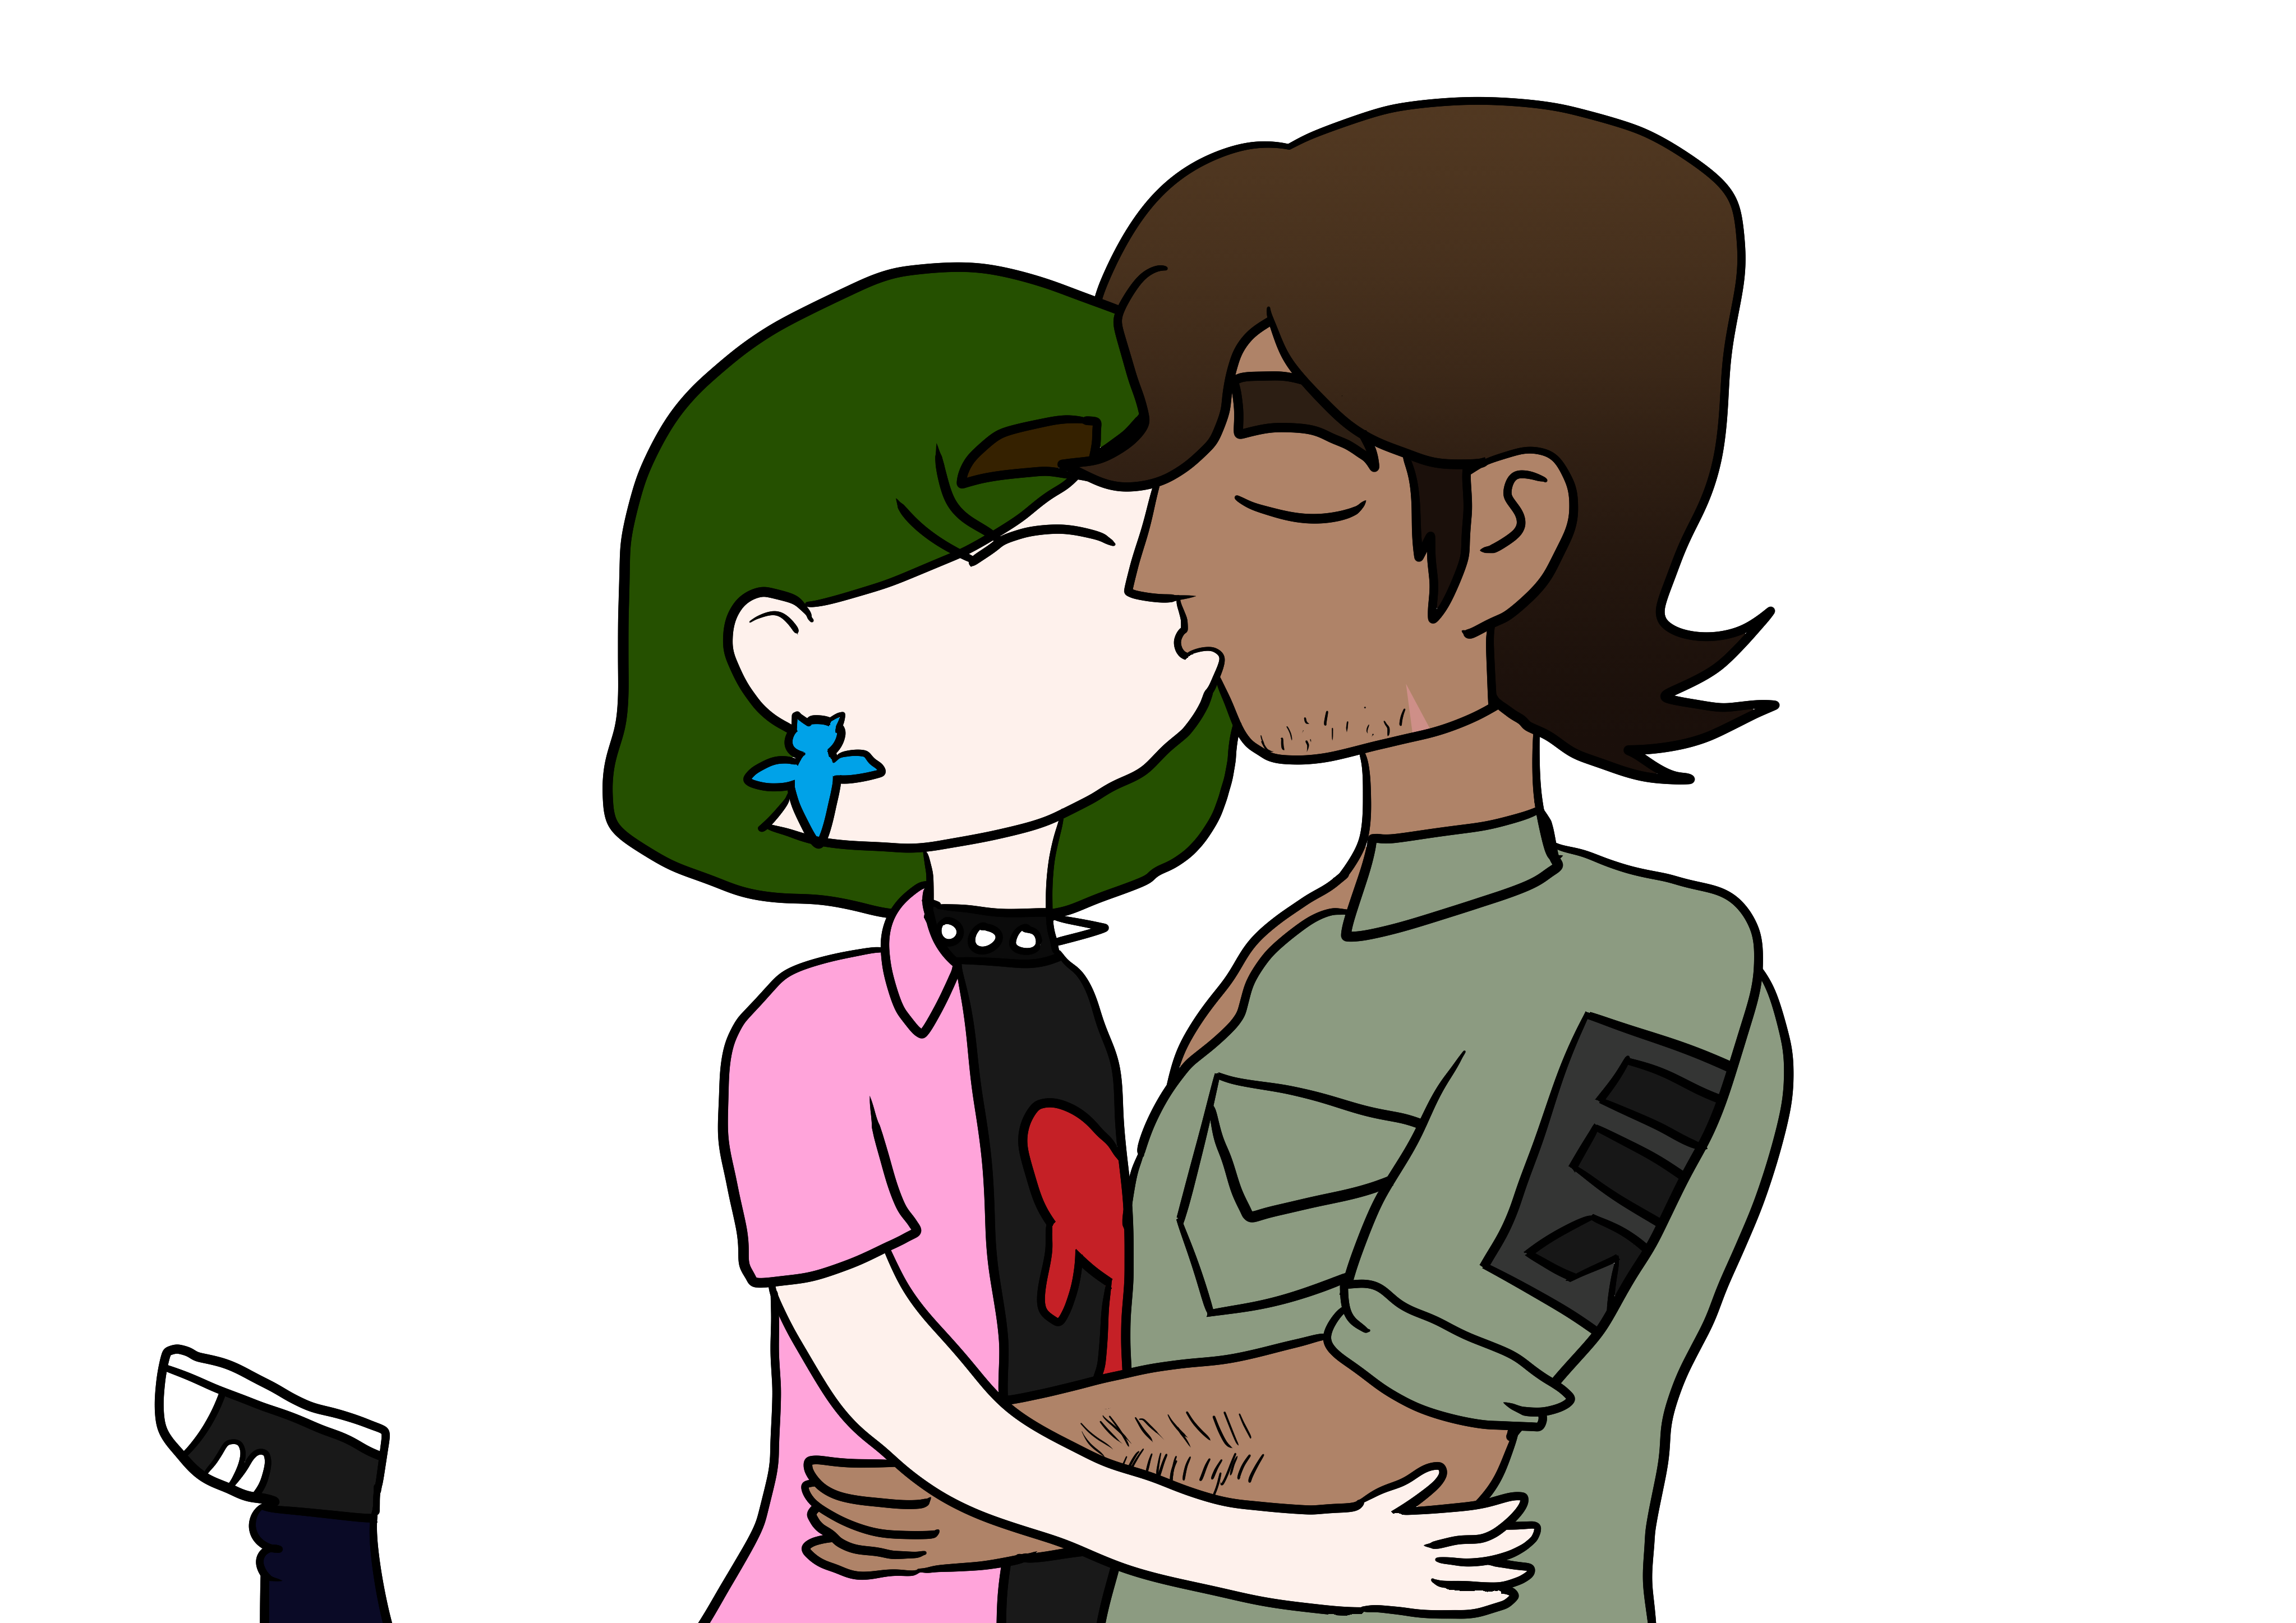 Strade kissing my sona, a pale green-haired boy